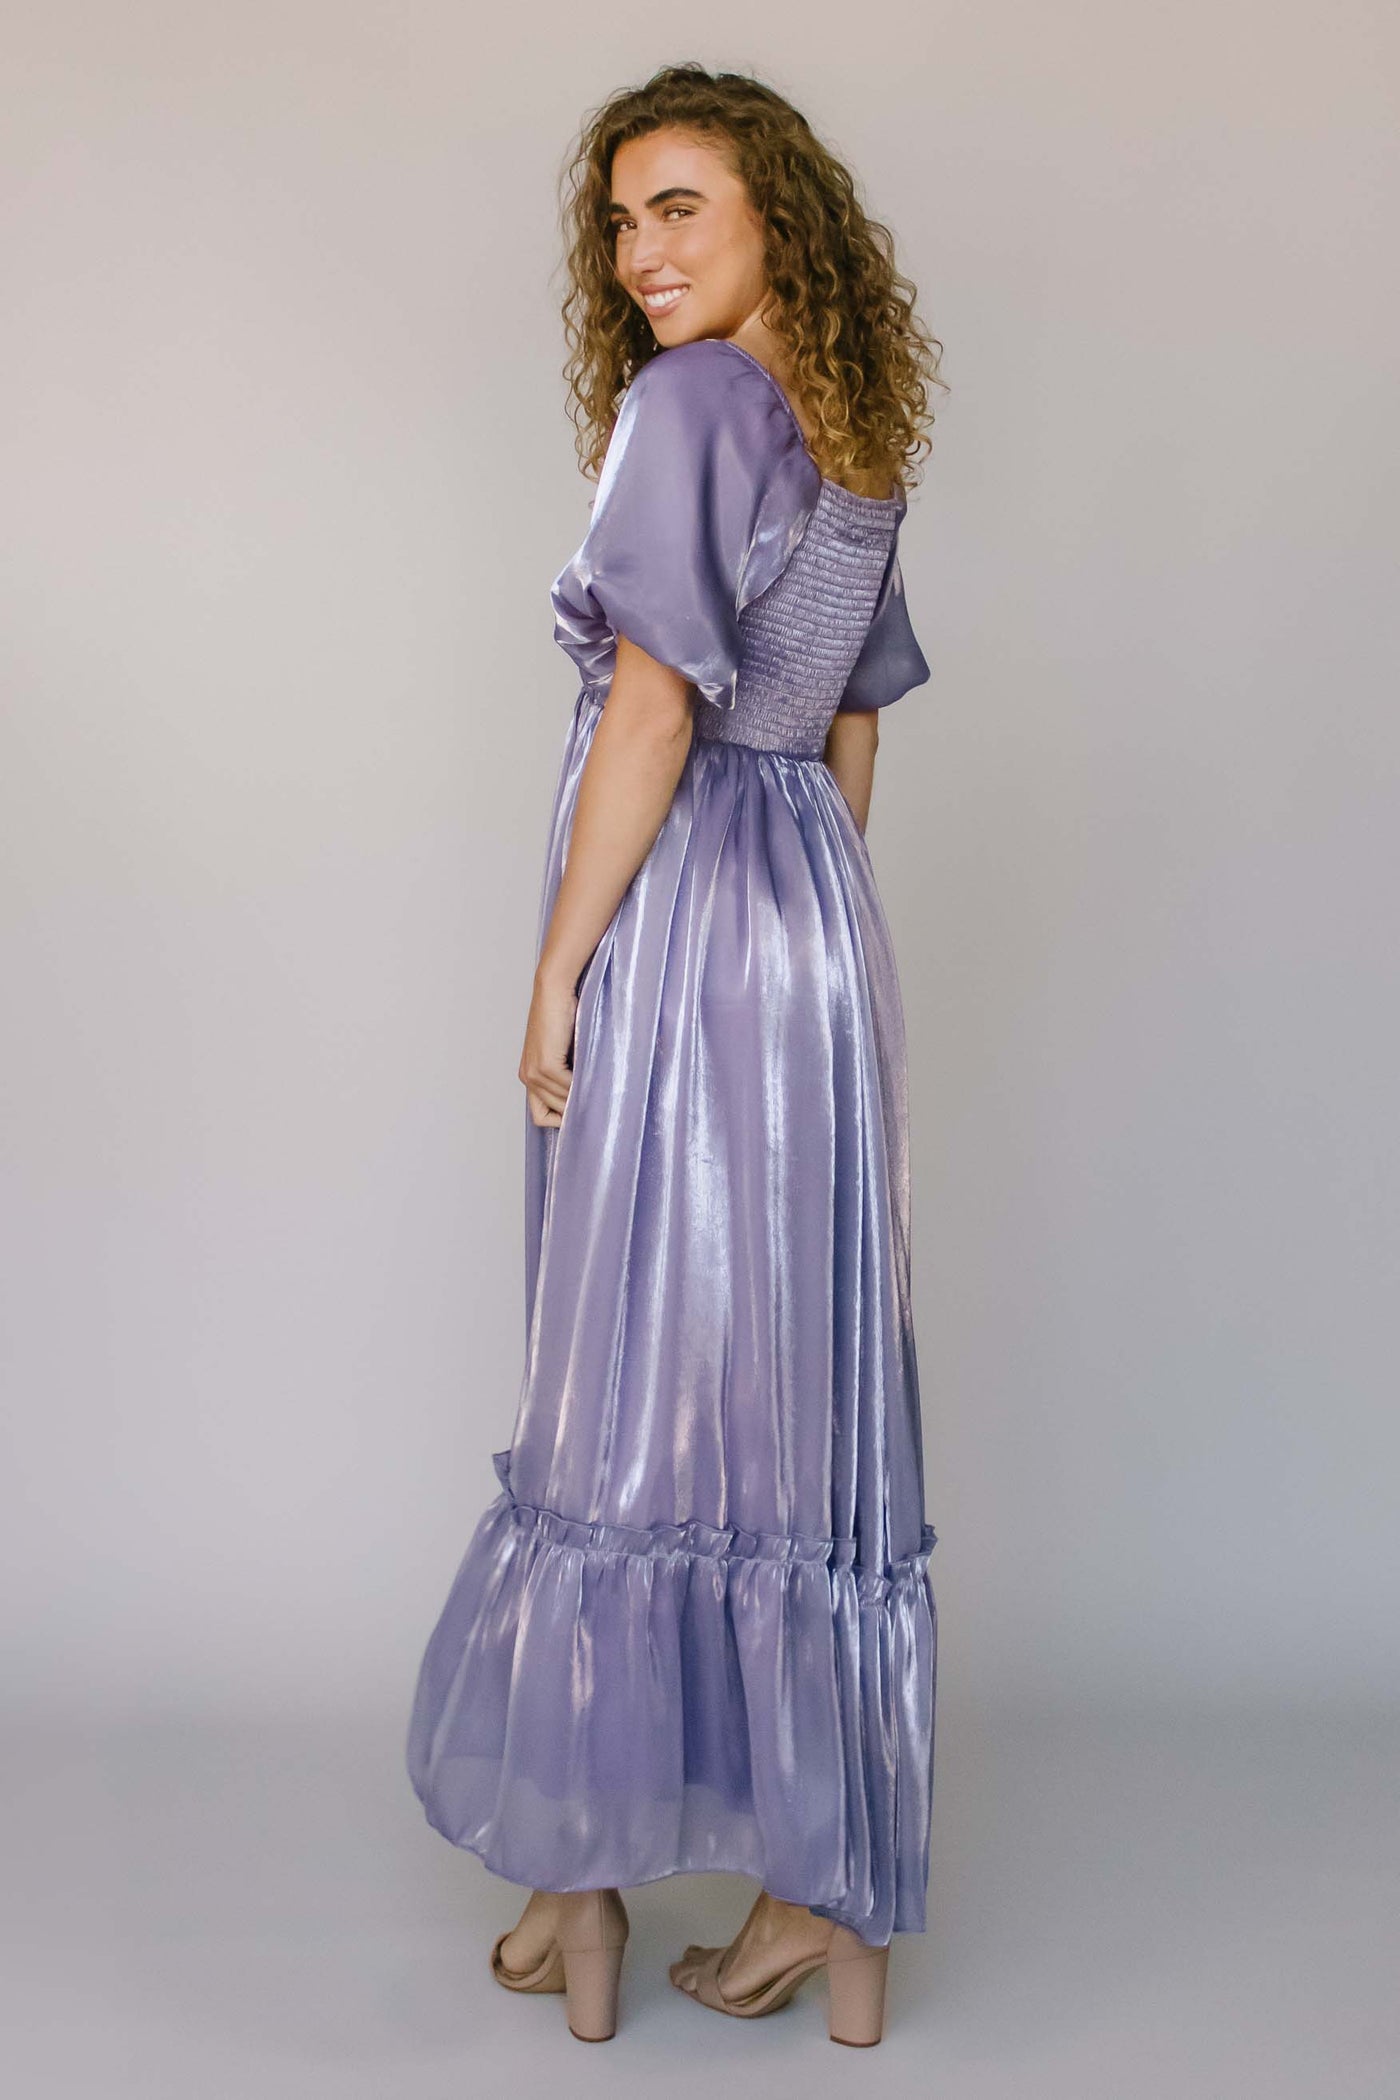 A back shot of a modest dress with puff sleeves, a square neck, and an iridescent purple fabric.